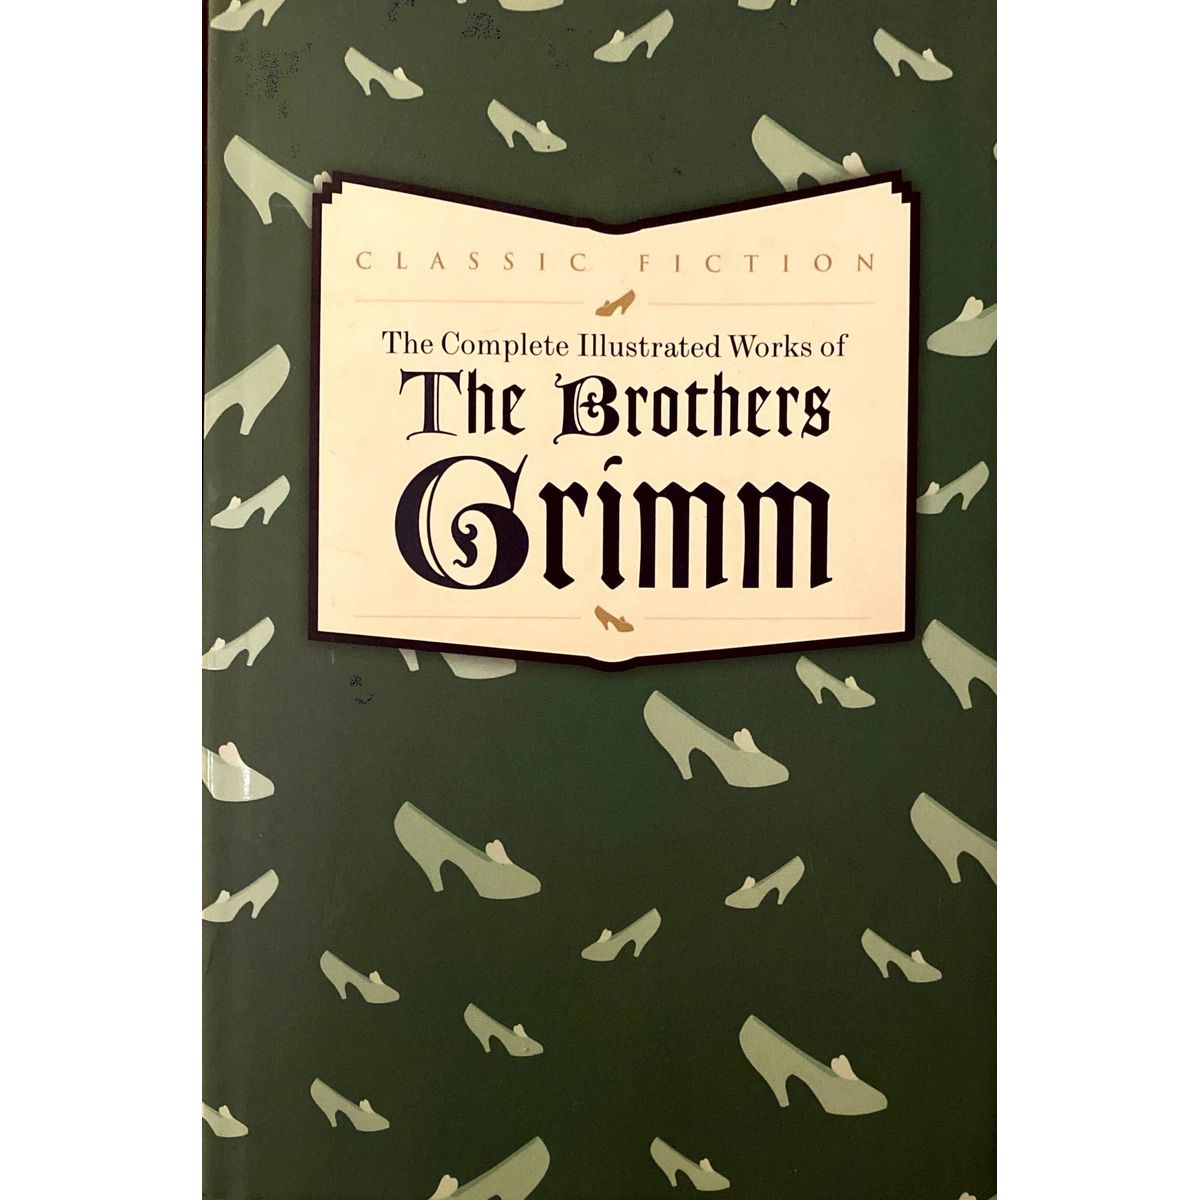 ISBN: 9780753724736 / 0753724731 - The Complete Illustrated Works of The Brothers Grimm [2013]